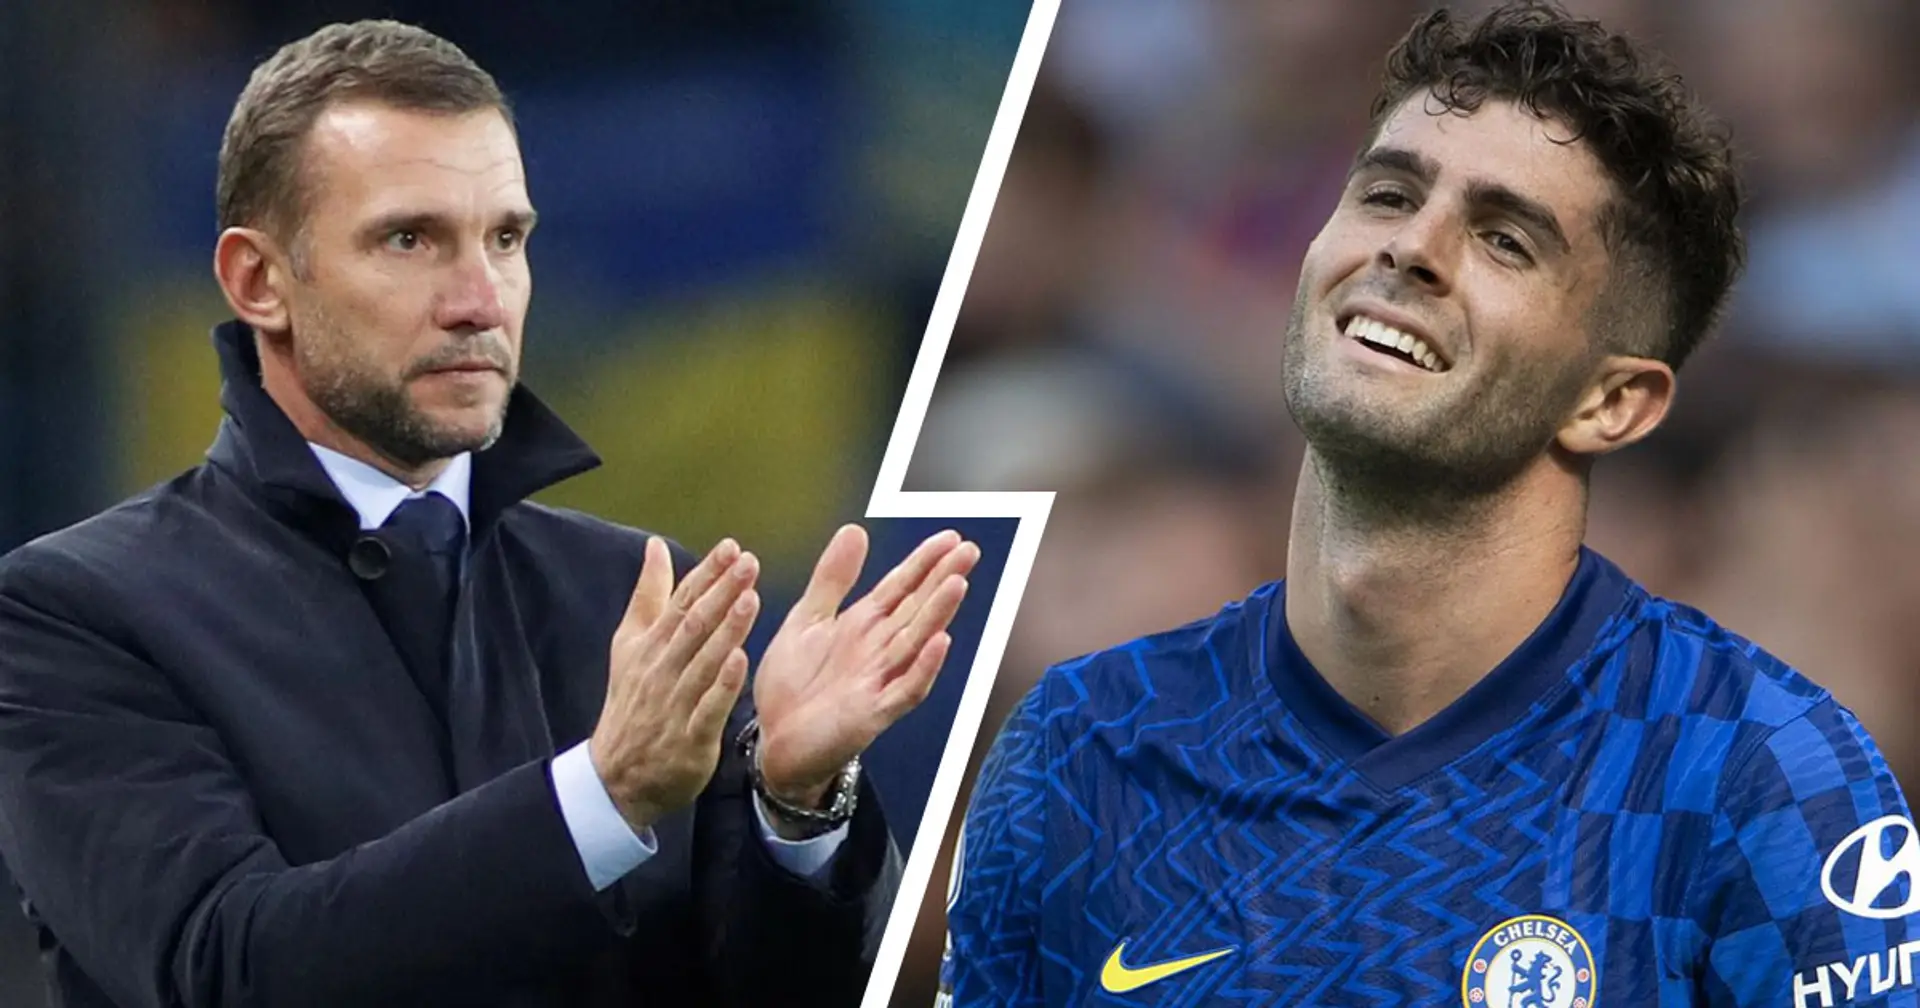 Andriy Shevchenko reportedly planning to sign Pulisic for Genoa